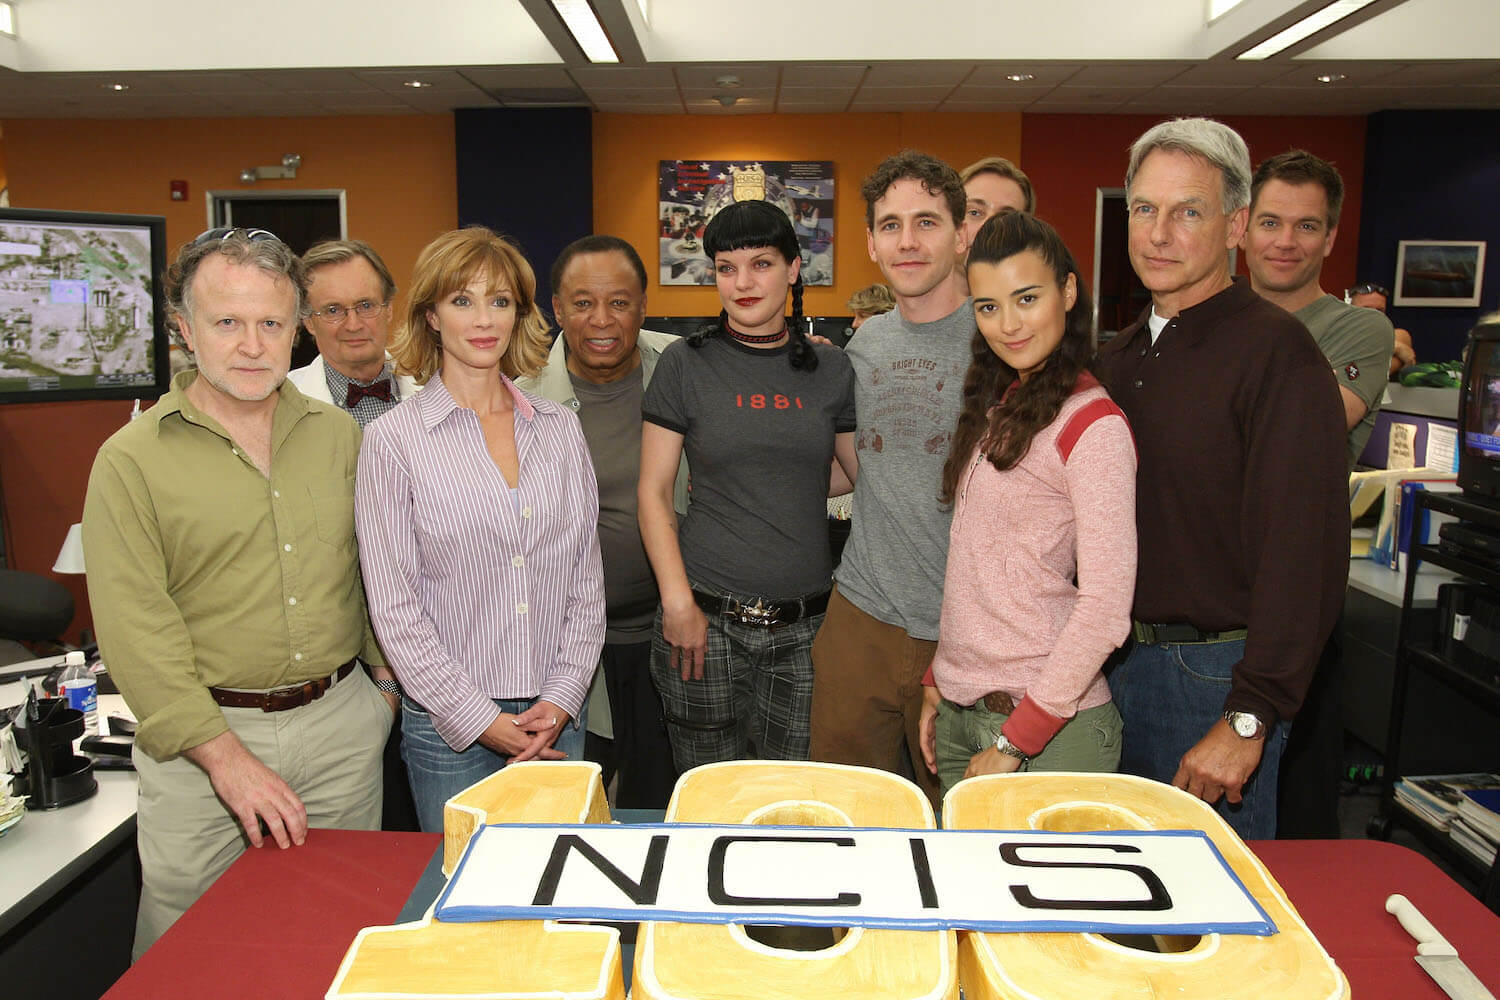 'NCIS' cast members with producers Shane Brennan (L) and Charles Floyd Johnson standing in front of a cake celebrating the 100th episode